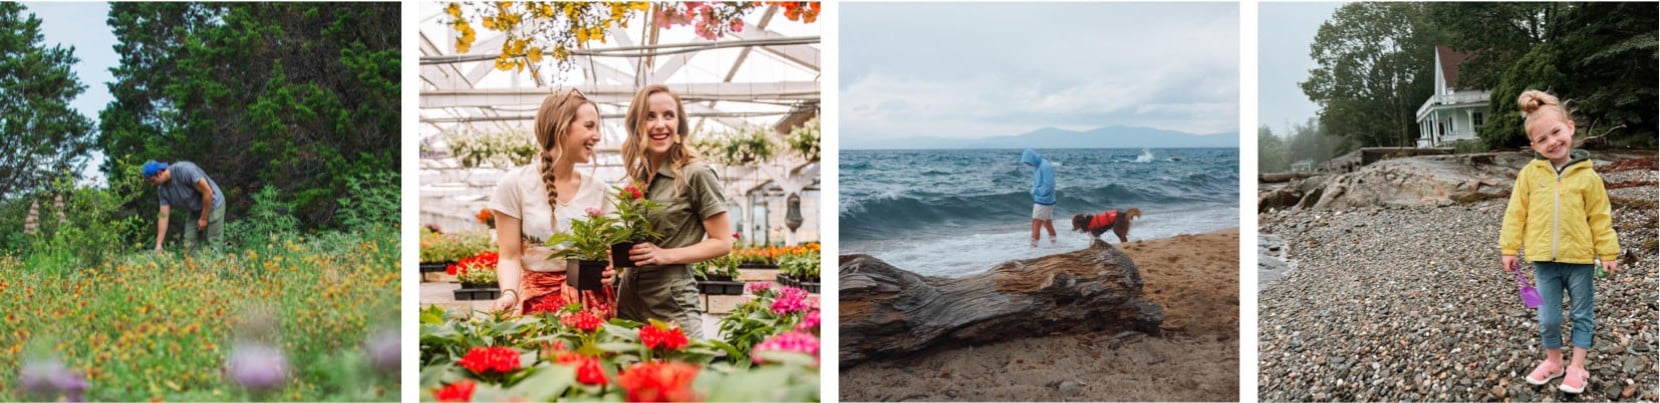 4 images of people enjoying the spring outdoors at the ocean, in a flower field and a greenhouse.